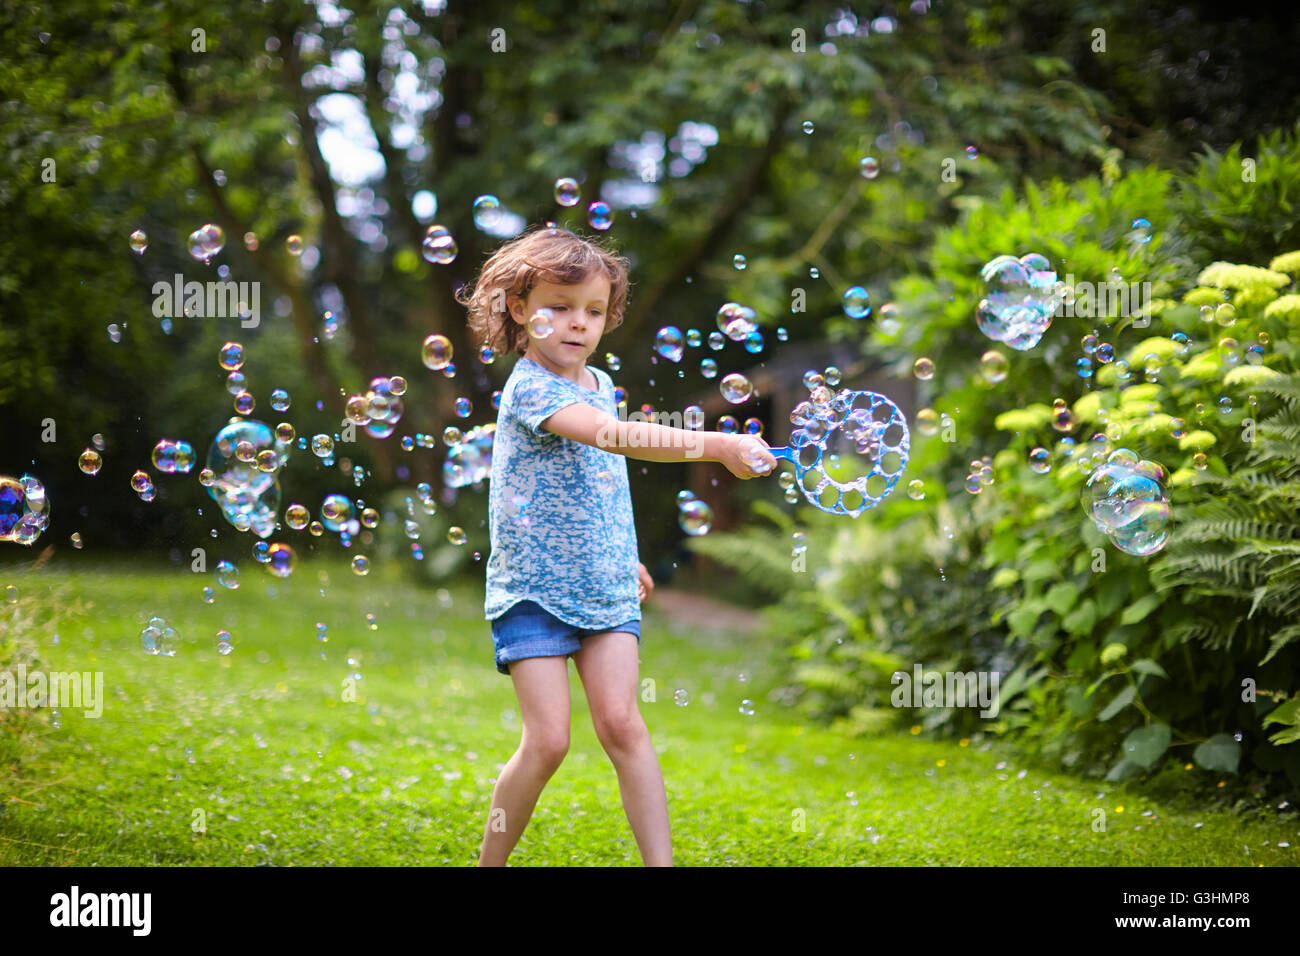 Girl waving bubble wand and making bubbles in garden Stock Photo